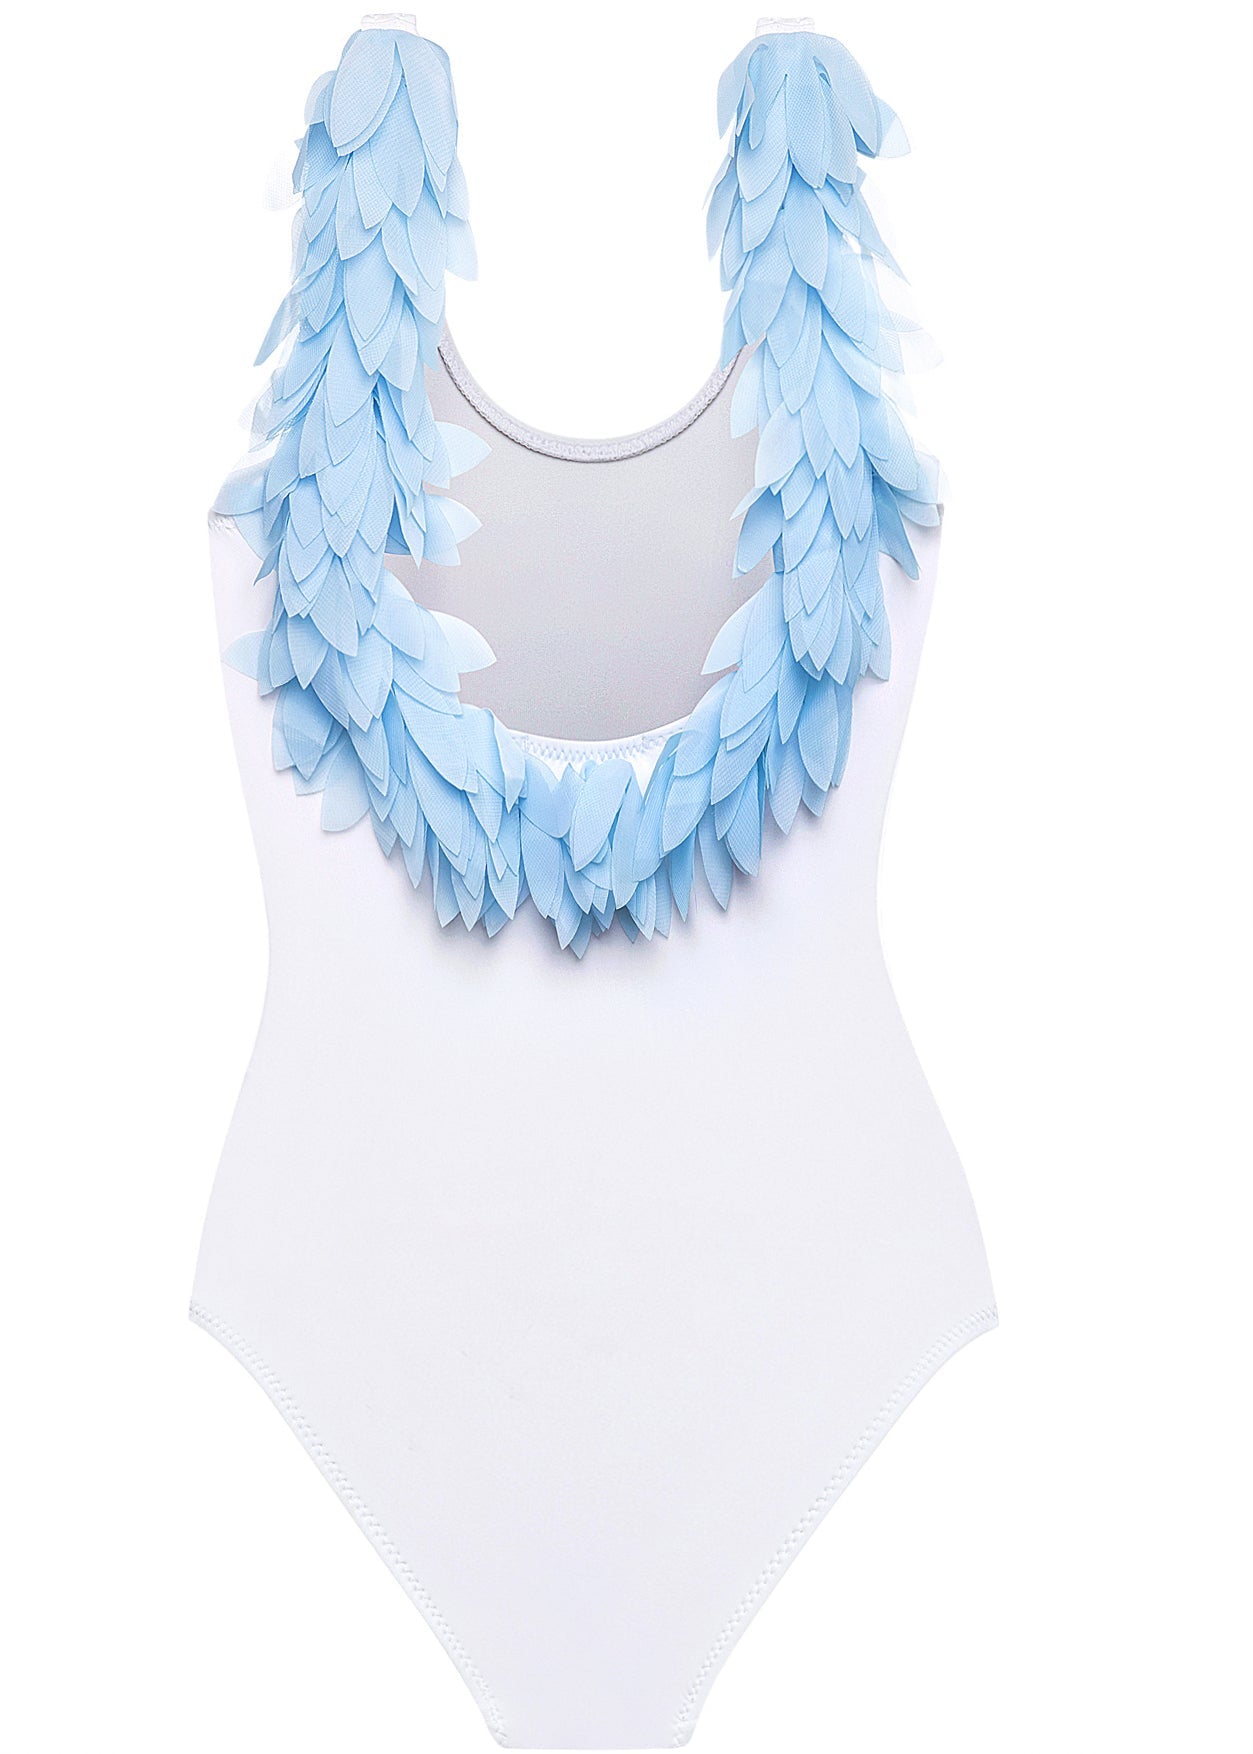 Womens White Bathing Suit with Blue Petals